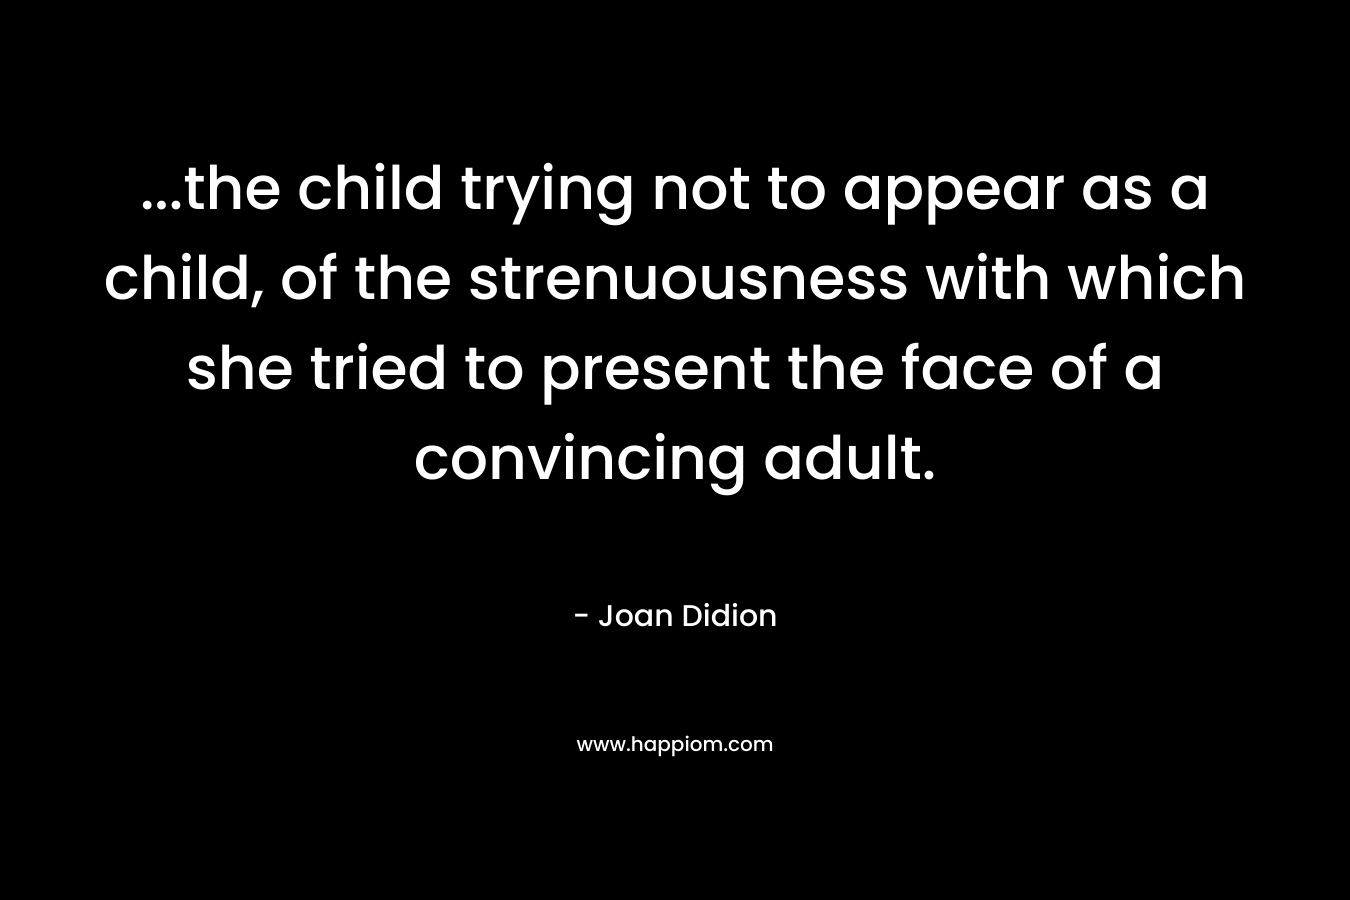 …the child trying not to appear as a child, of the strenuousness with which she tried to present the face of a convincing adult. – Joan Didion